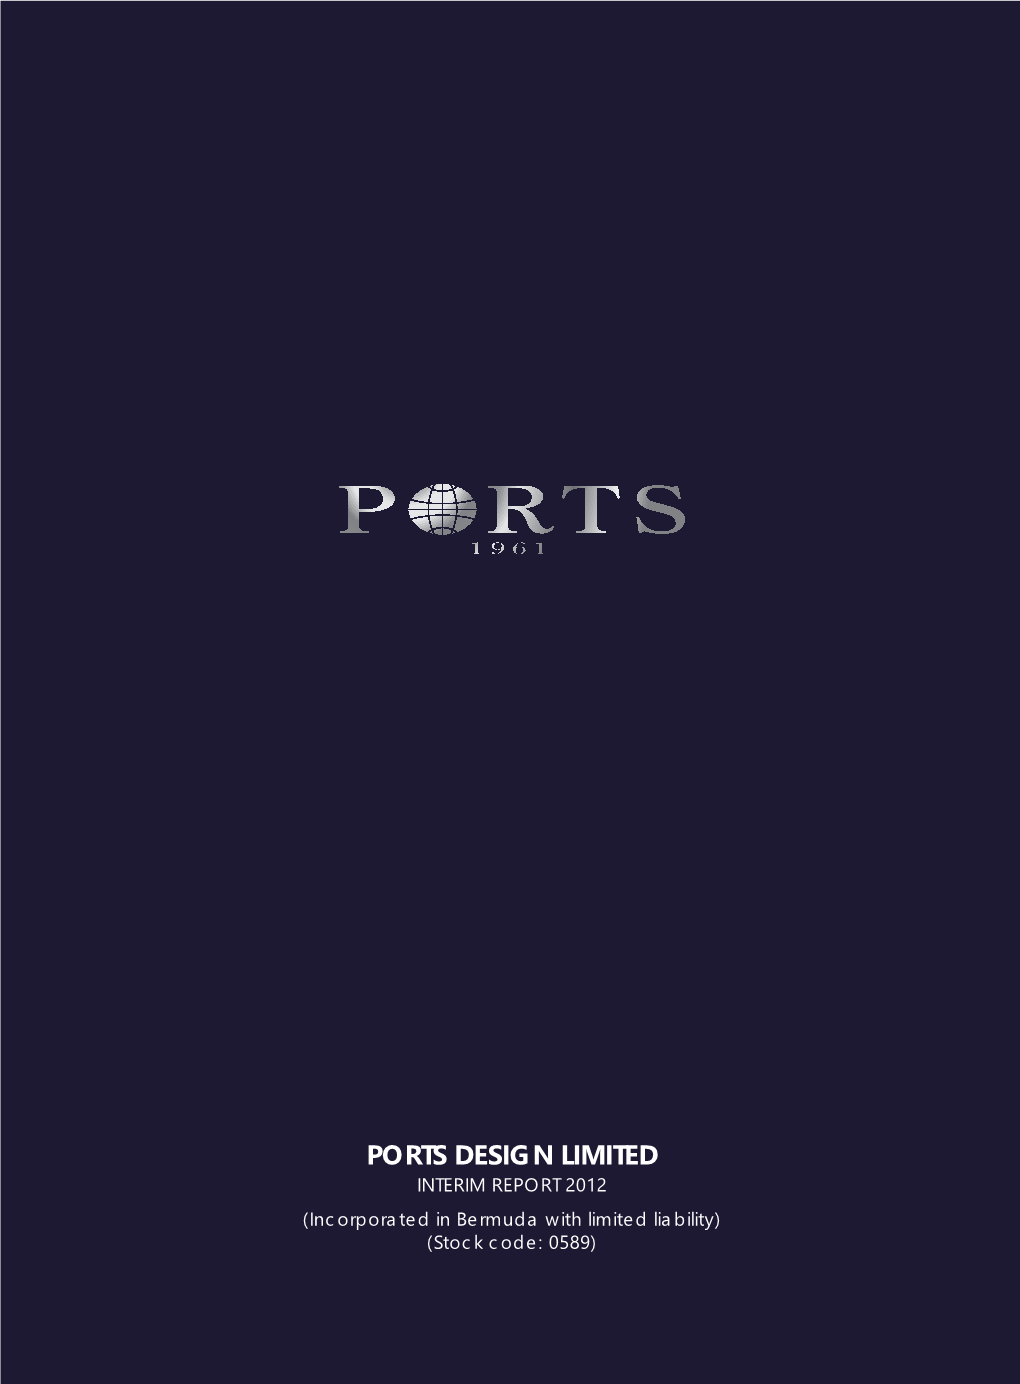 PORTS DESIGN LIMITED (Incorporated in Bermuda with Limited Liability)